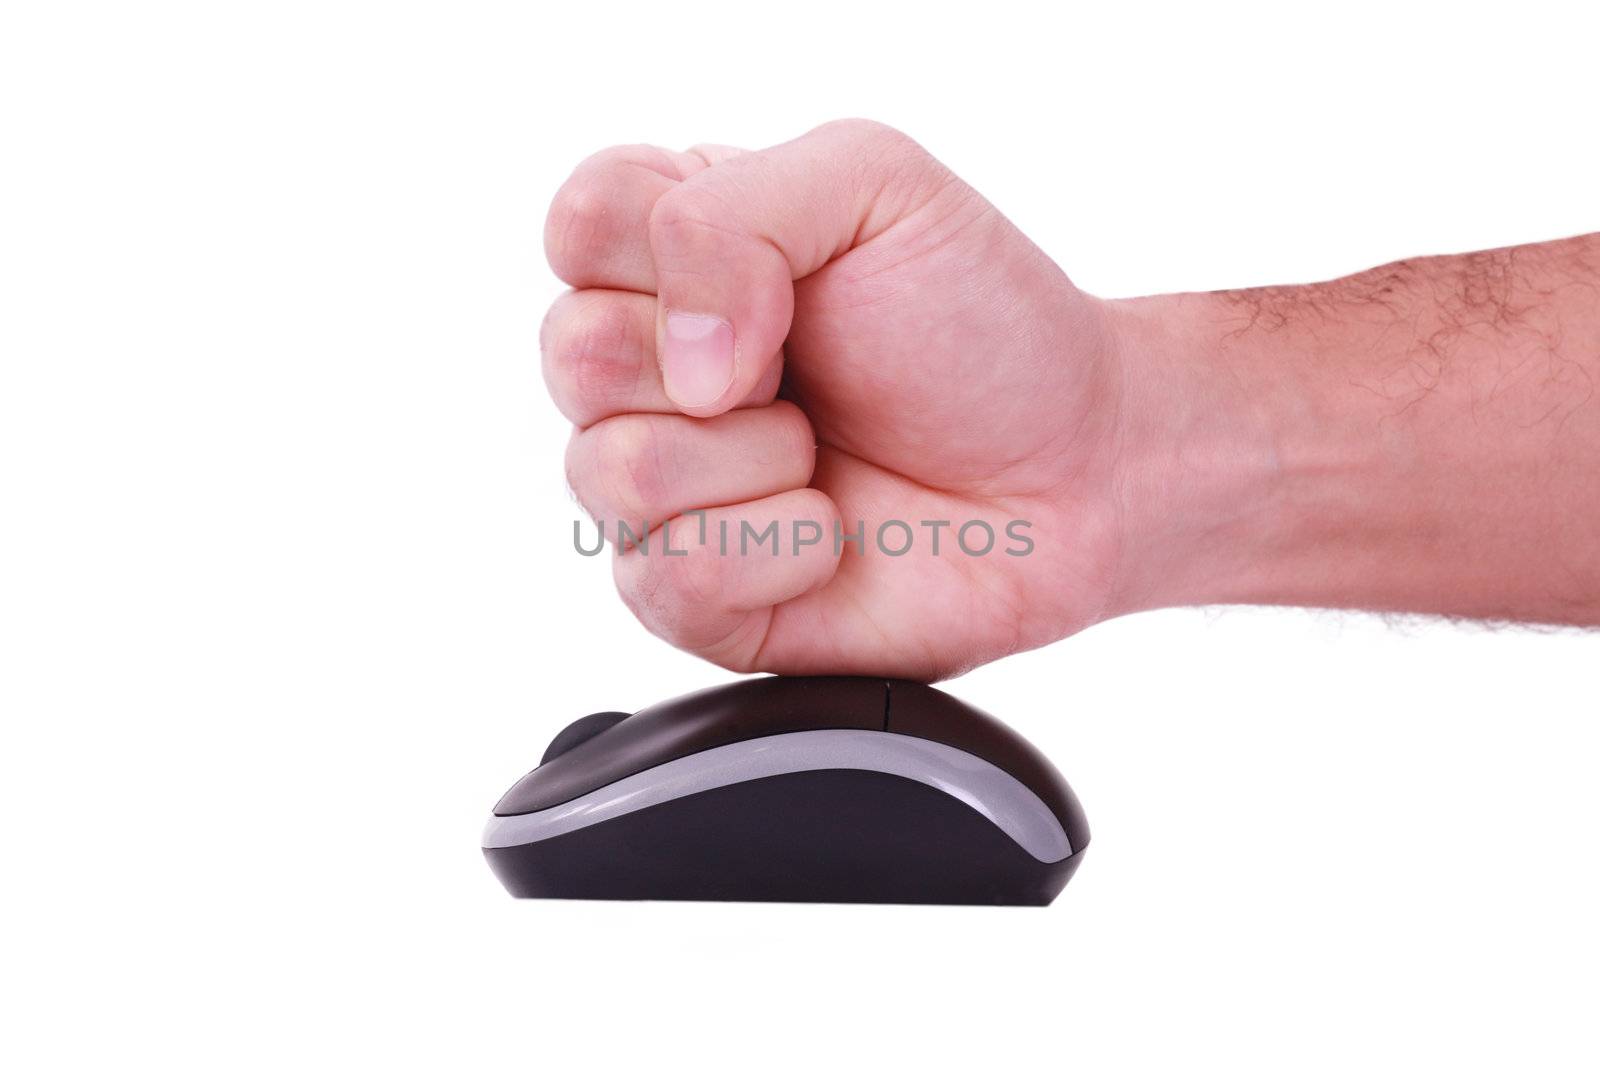 A male man punching a white mouse, white background by dacasdo